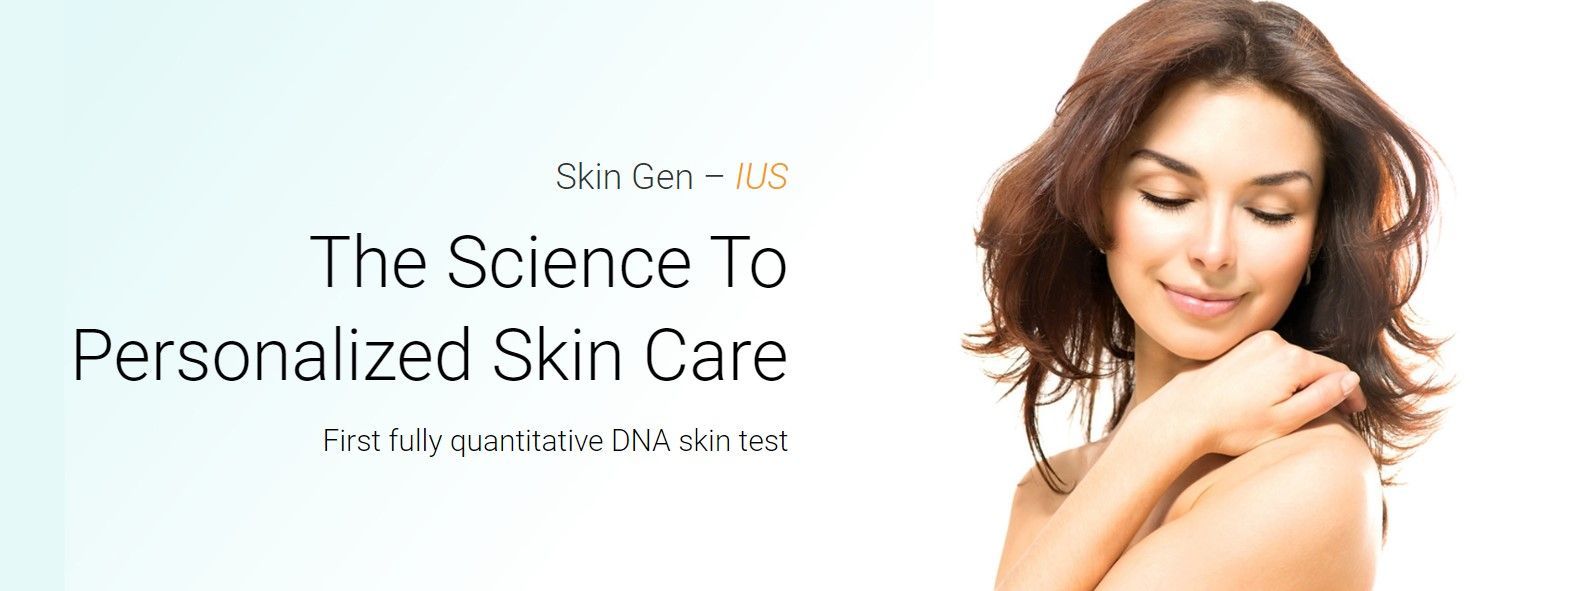 The Science To Personalized Skin Care